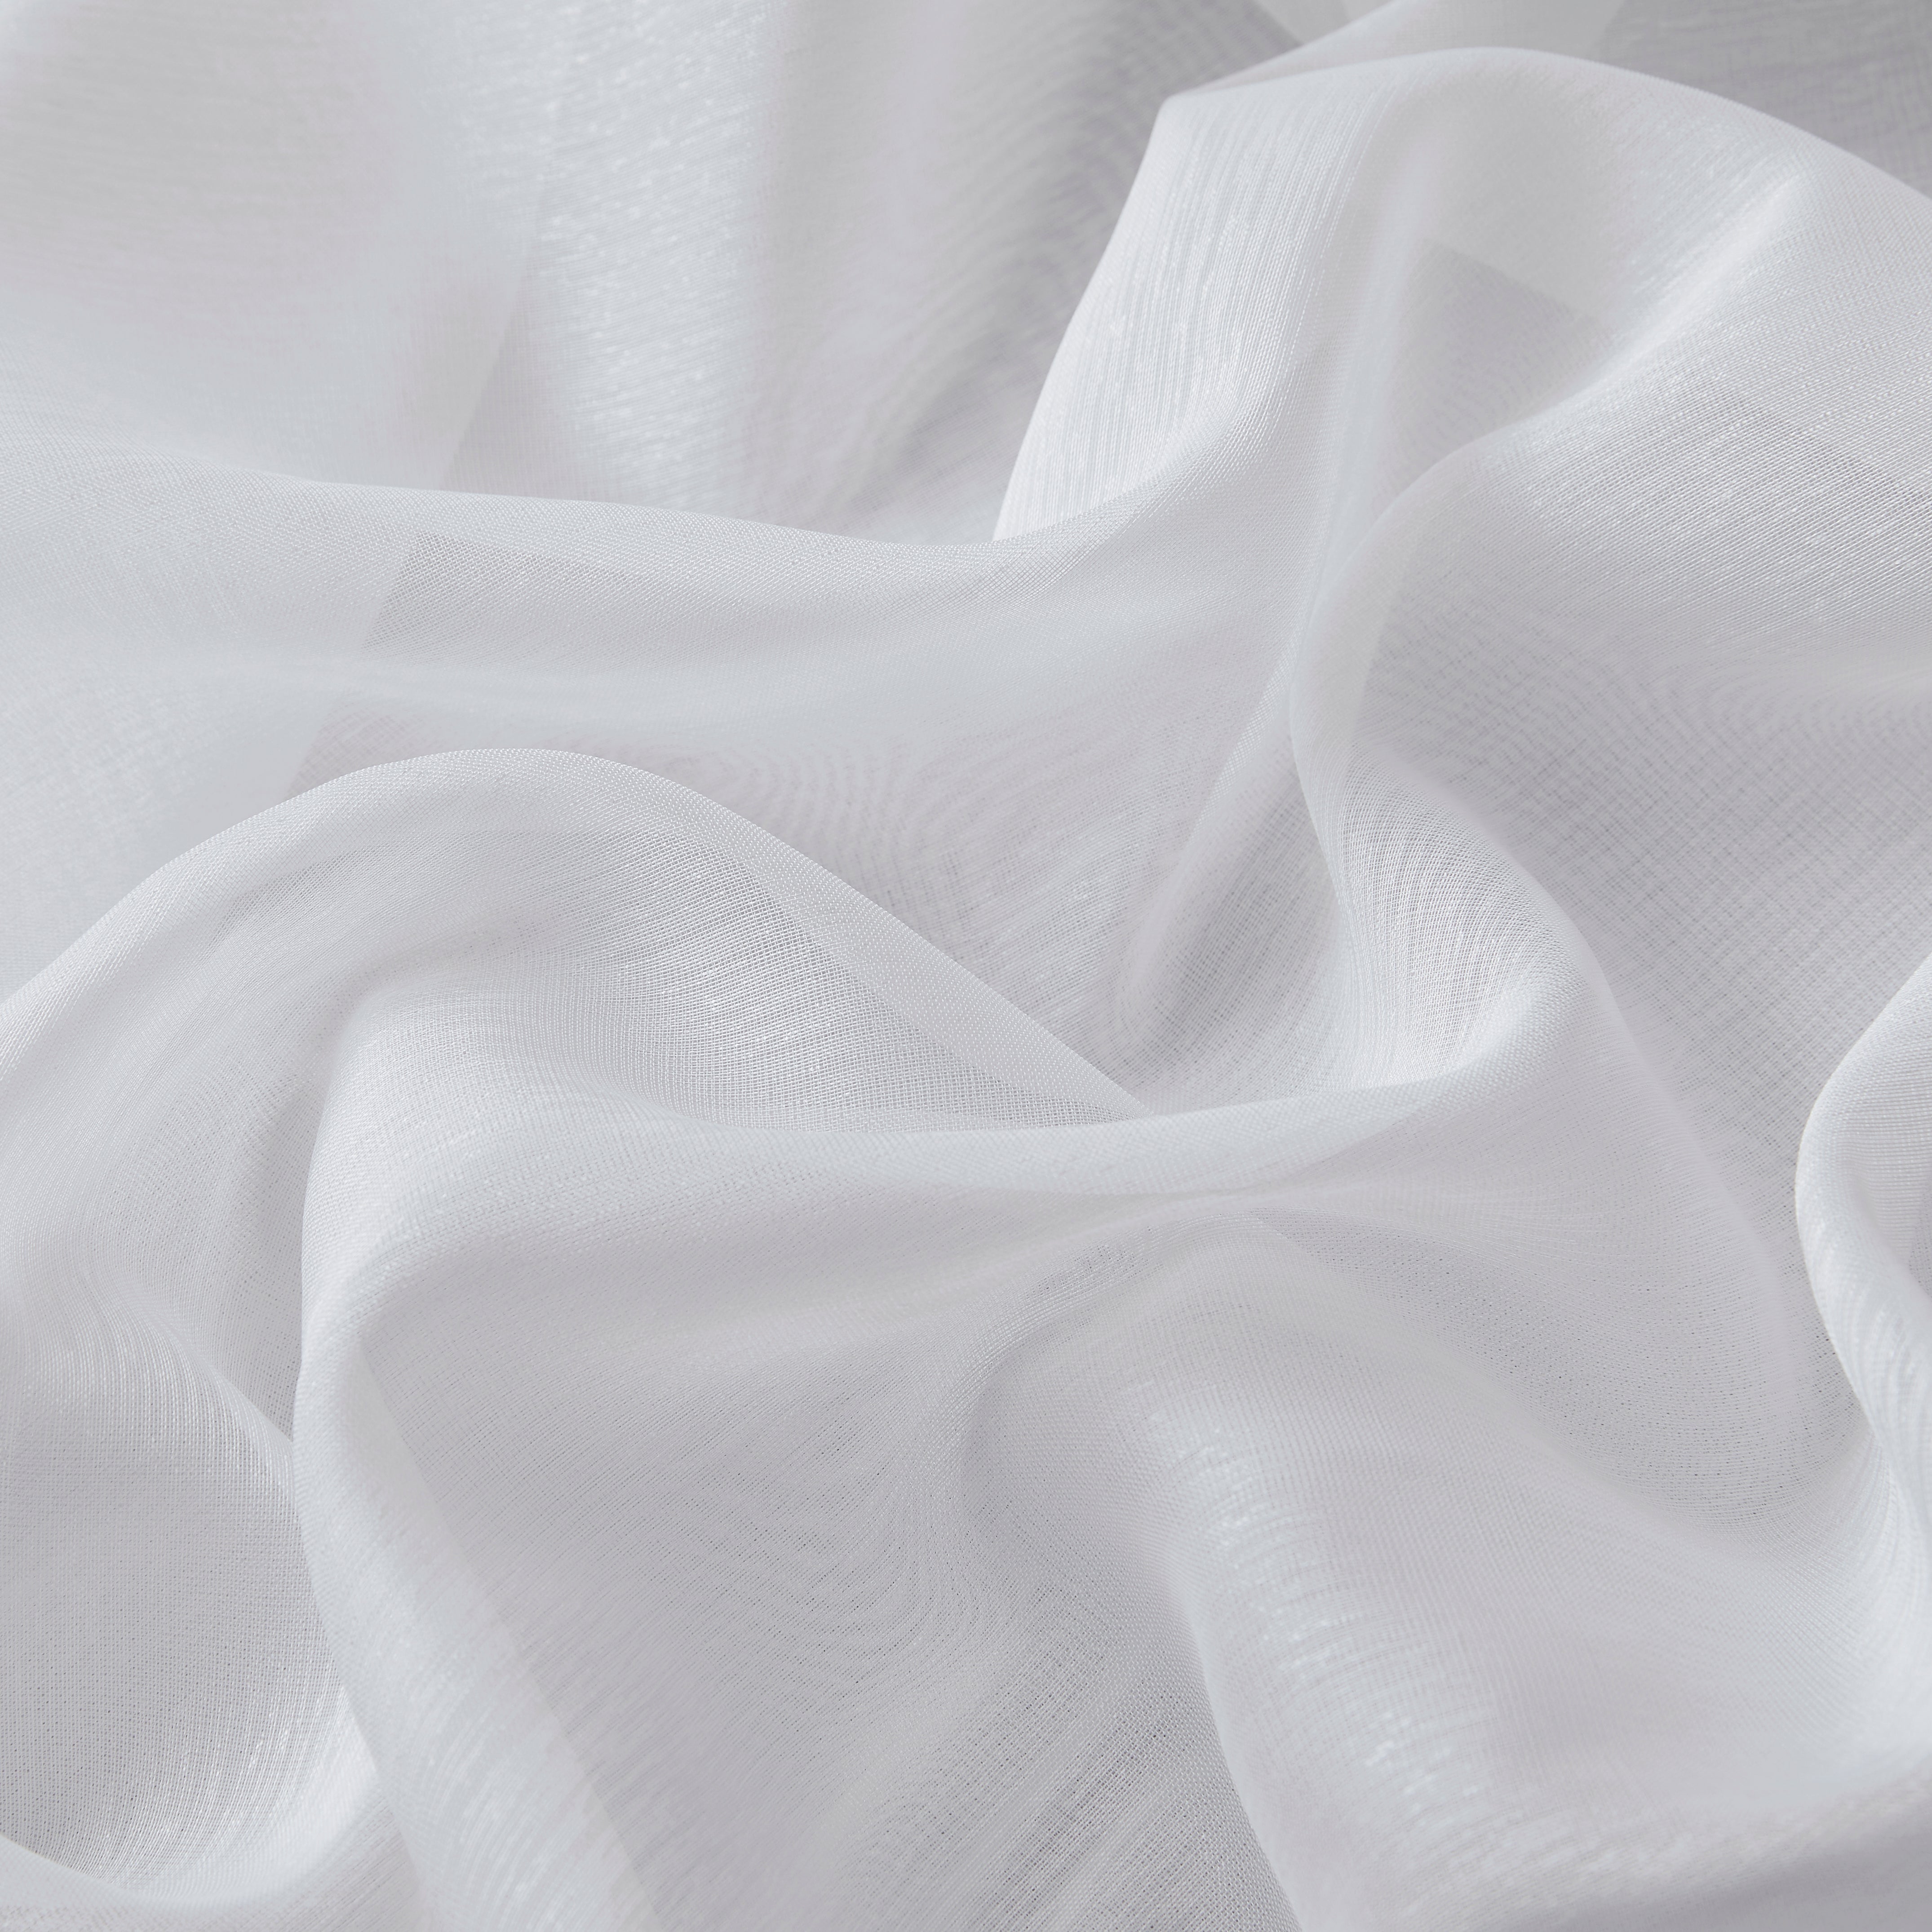 The Science Behind Voiles, Sheers, and Linen